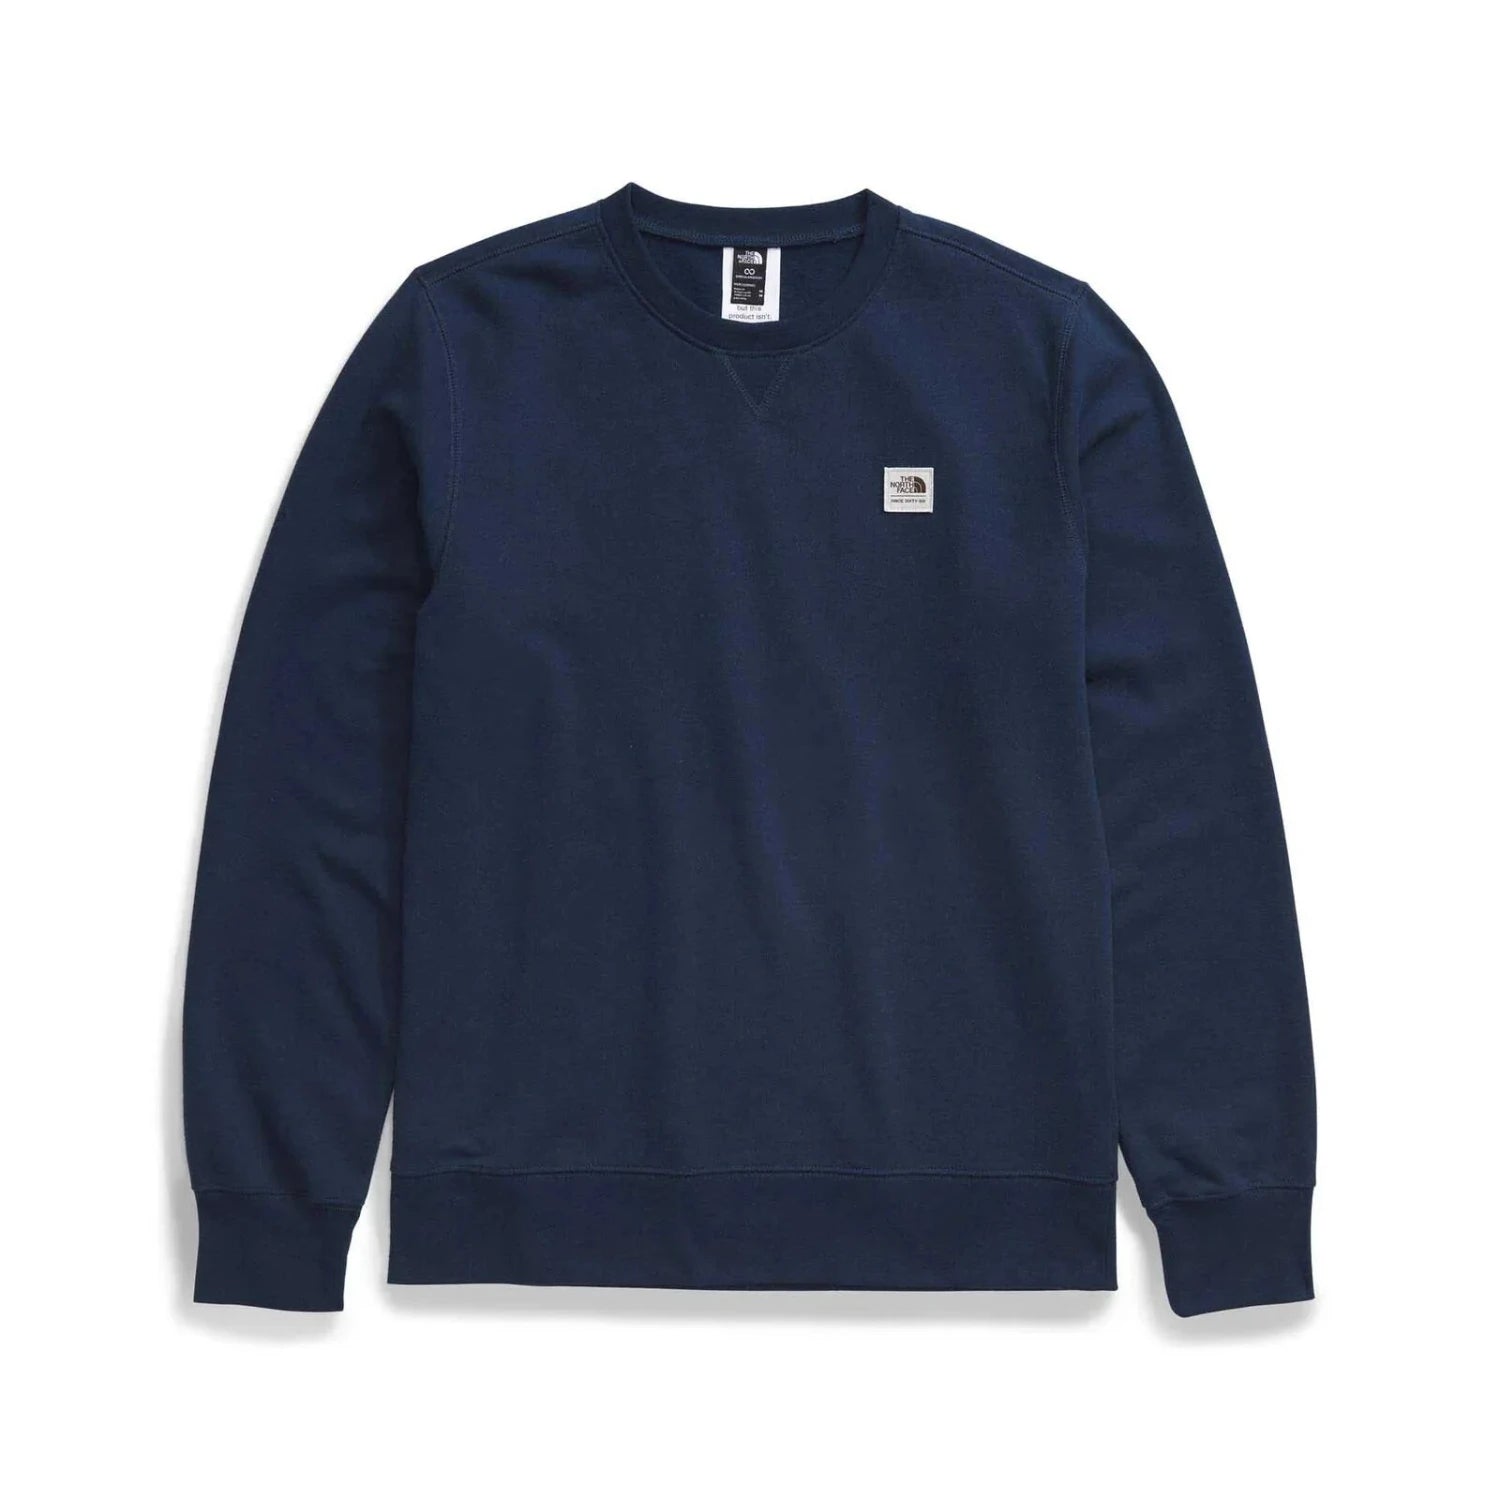 The North Face M's Heritage Patch Crew Sweatshirt, Summit Navy/TNF White, front view flat 